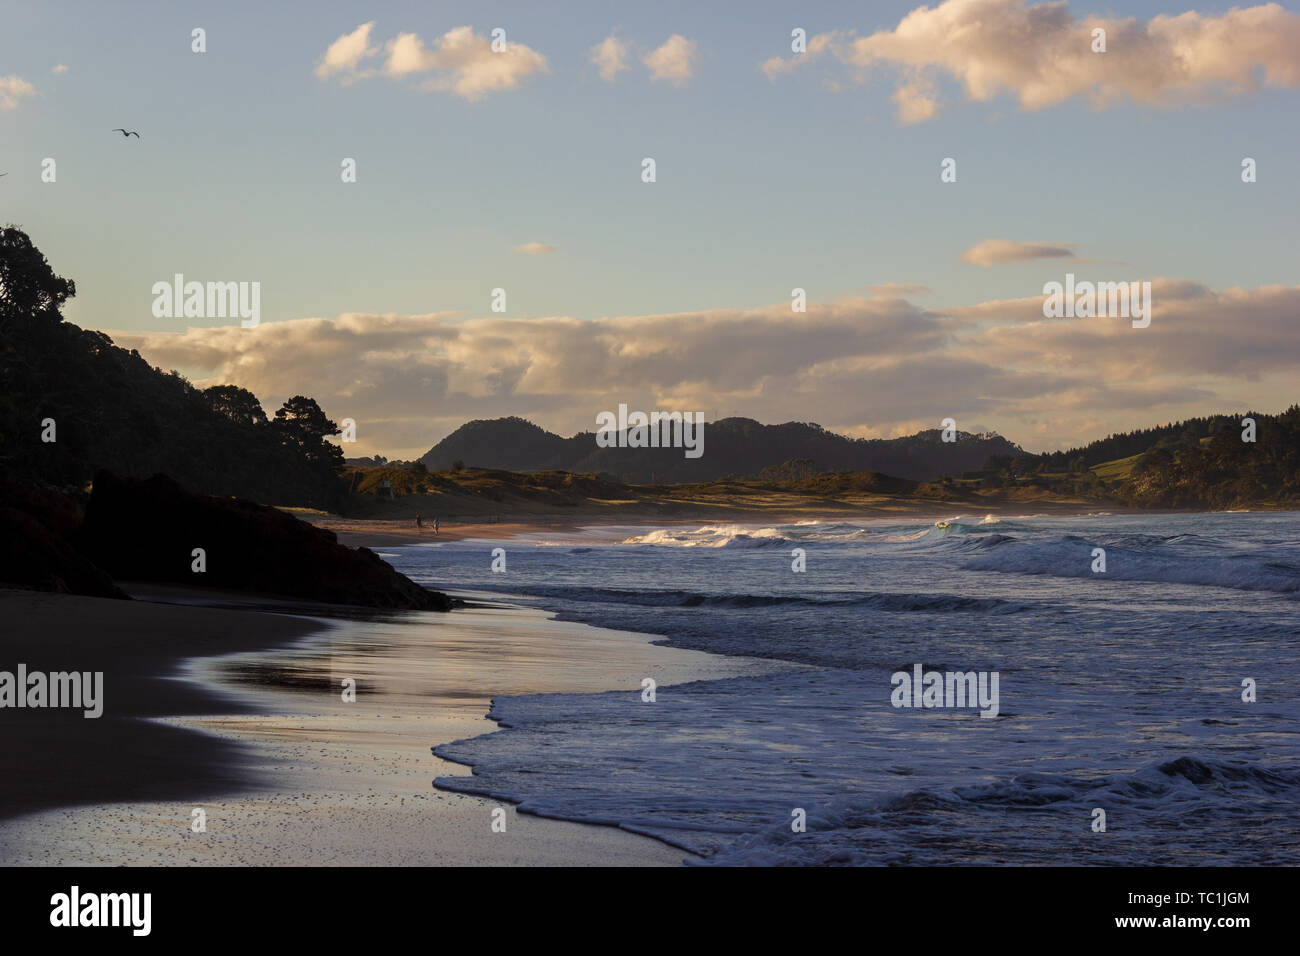 Sandy beach near New Zealand's hot water beach in mysterious evening scenery with calm pacific ocean. Stock Photo